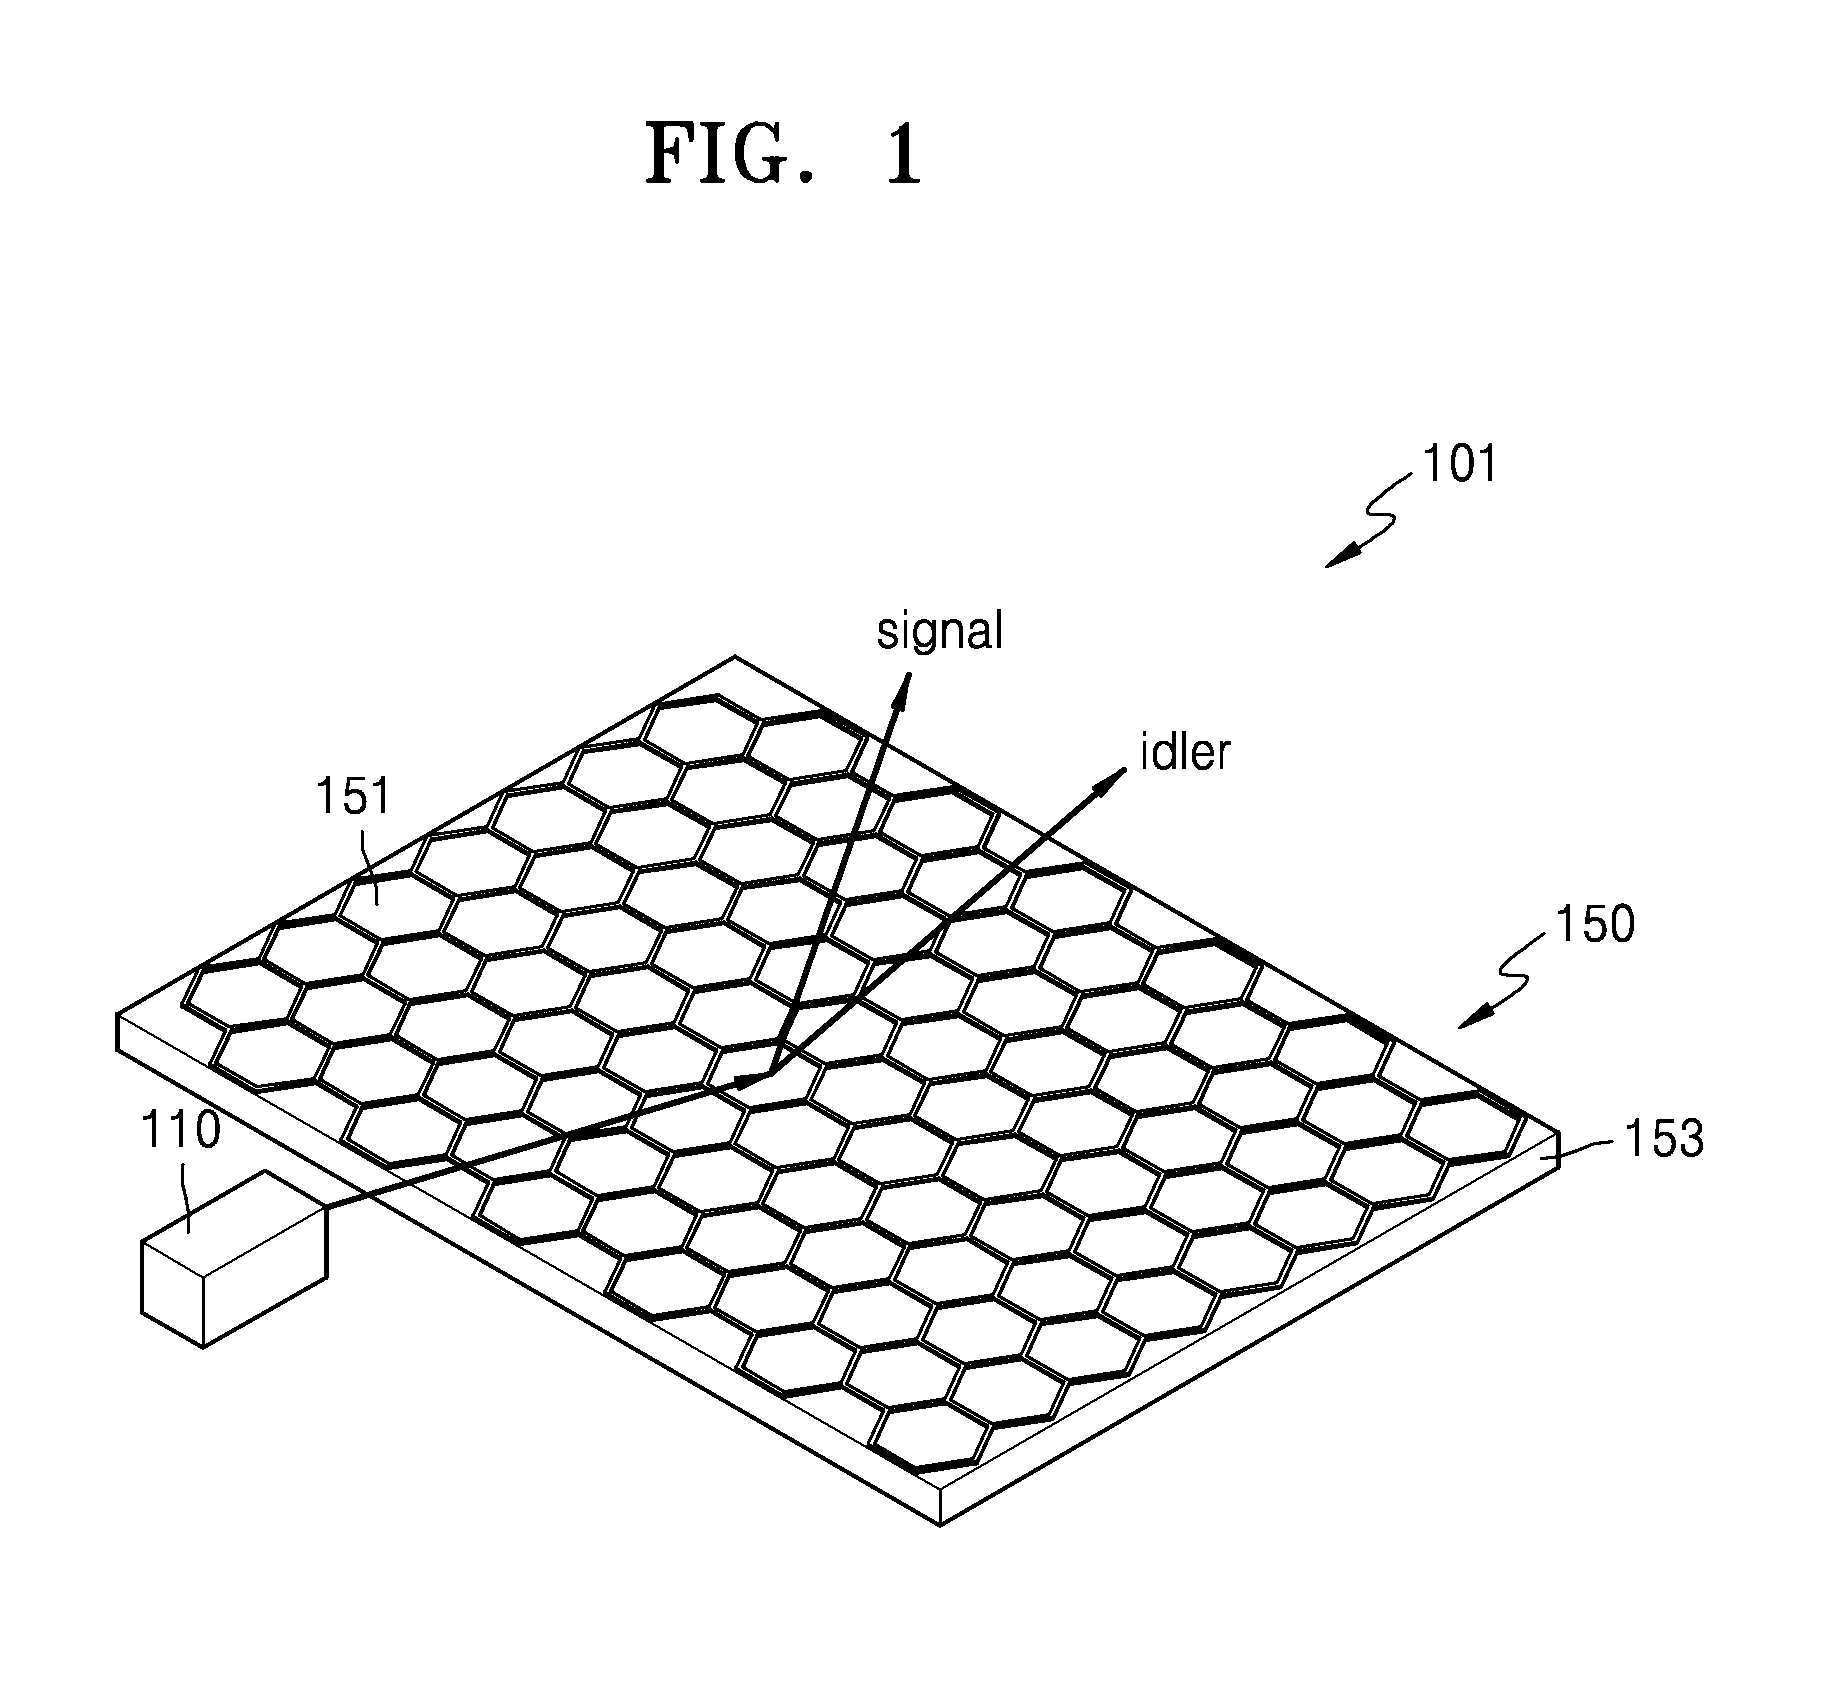 Photon pair generator and quantum cryptography system employing the same